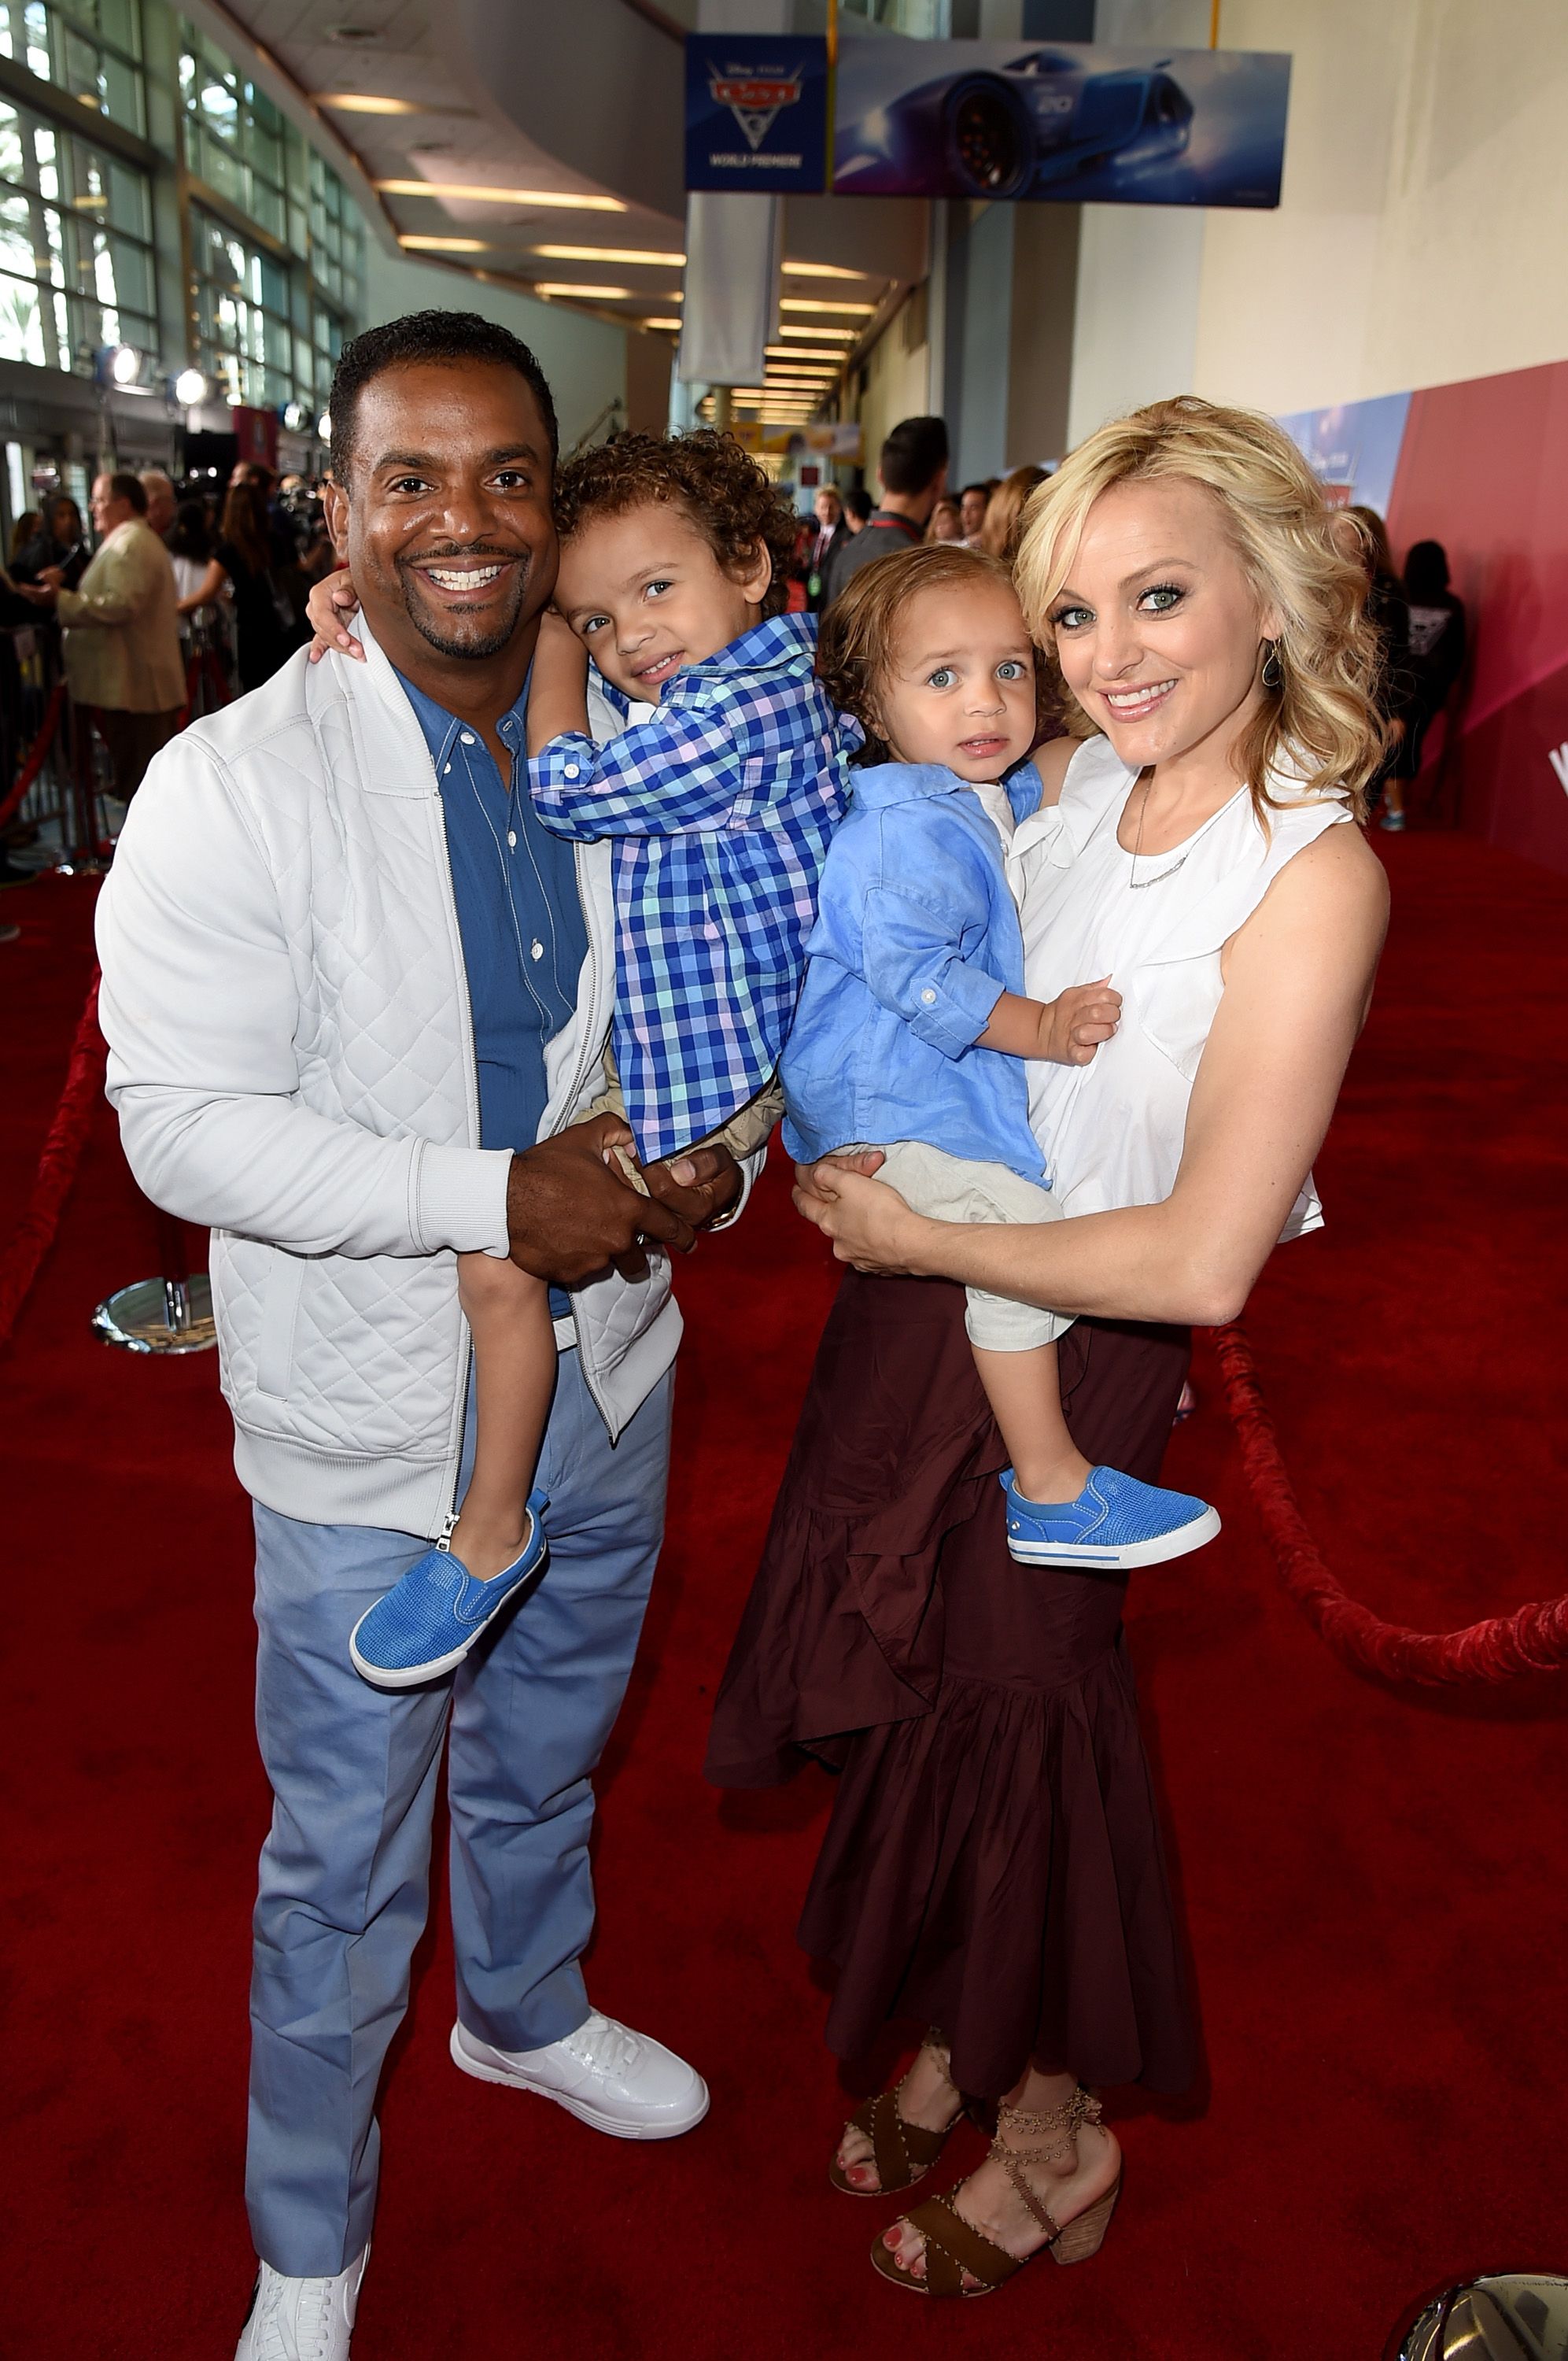 Alfonso Ribeiro Angela Unkrich and family at the premiere of Disney and Pixar's "Cars 3" at Anaheim Convention Center on June 10, 2017 | Photo: Getty Images